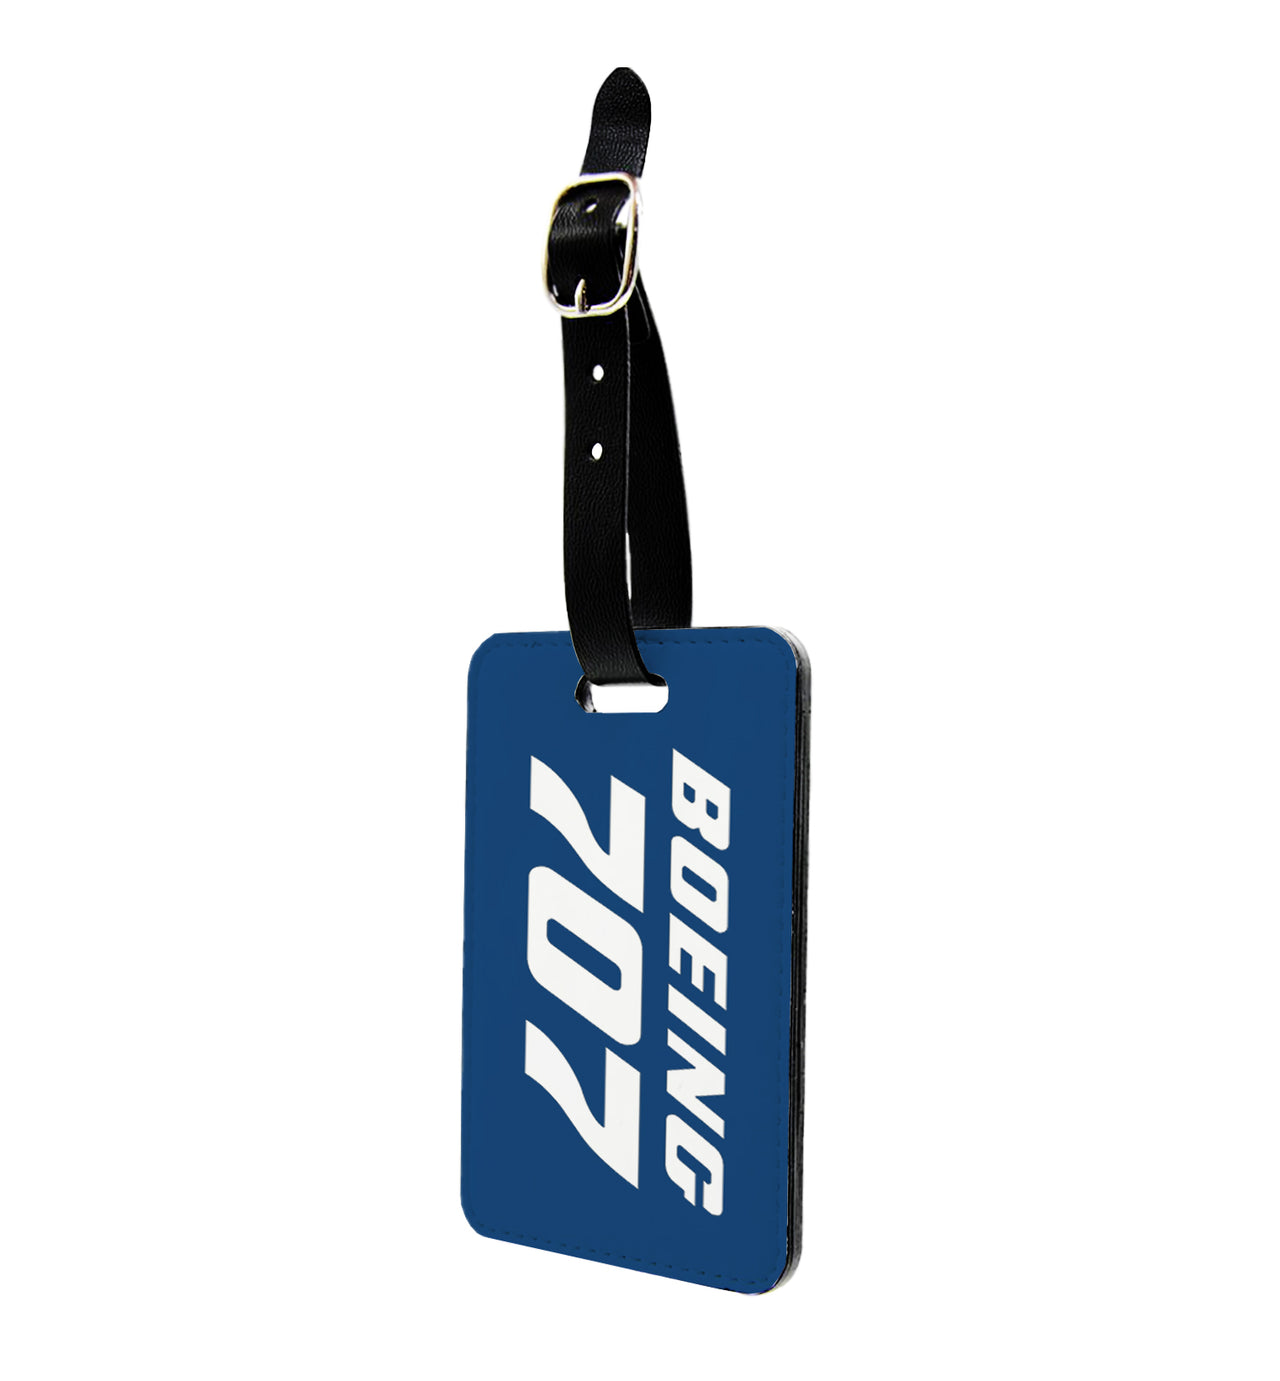 Boeing 707 & Text Designed Luggage Tag